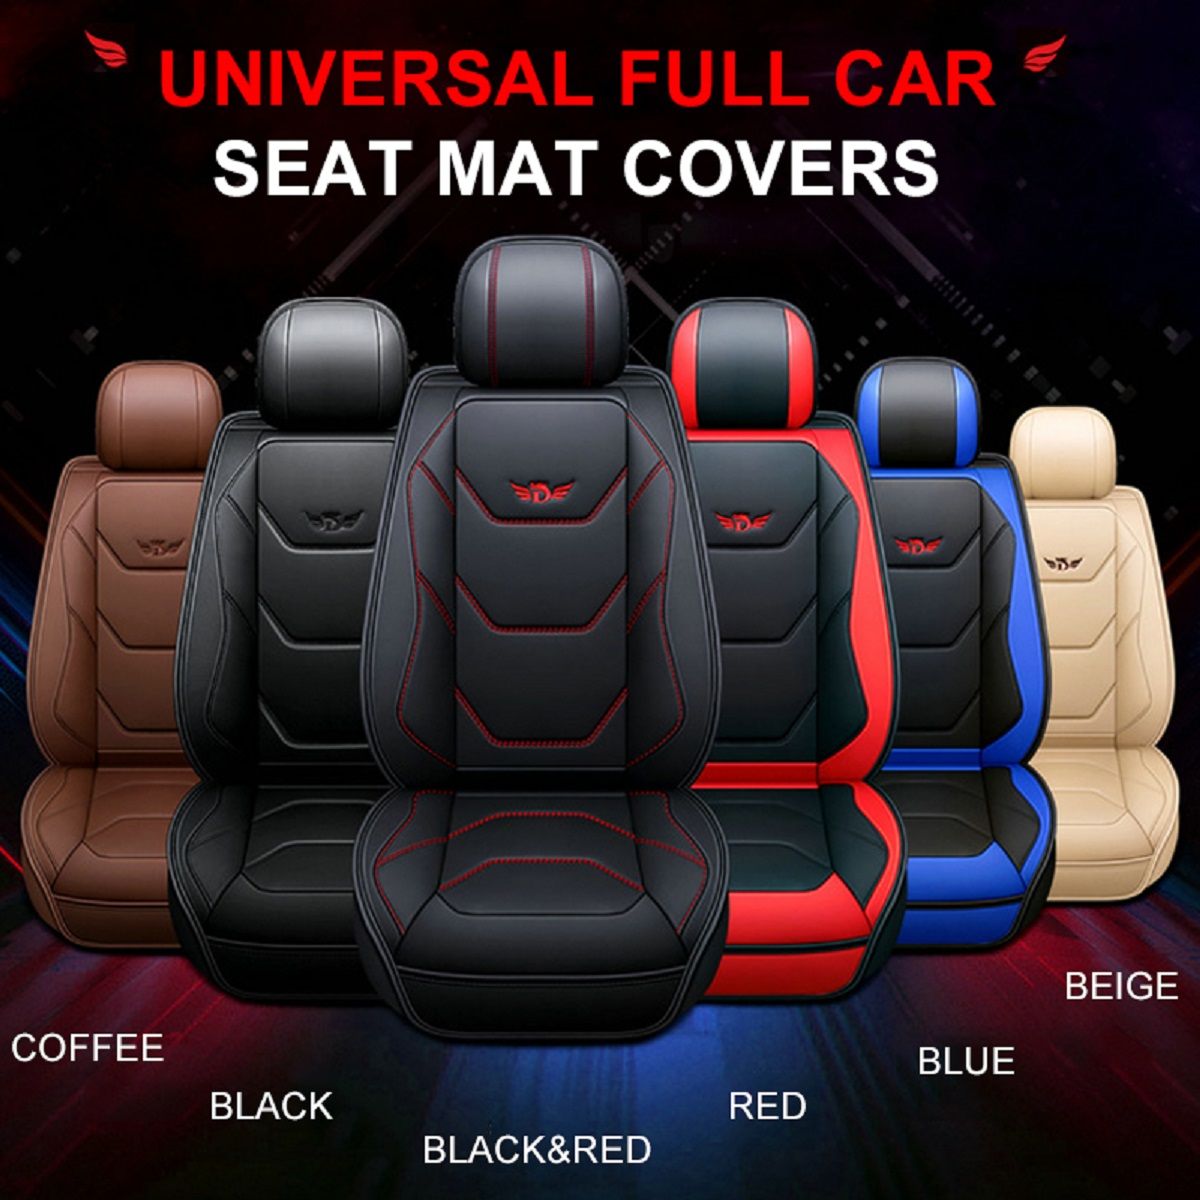 Universele Full Car Seat Cover Protector Front Rugleuning Kussen Pad Mat Voor Auto Voor Auto Styling Interieur Accessoires